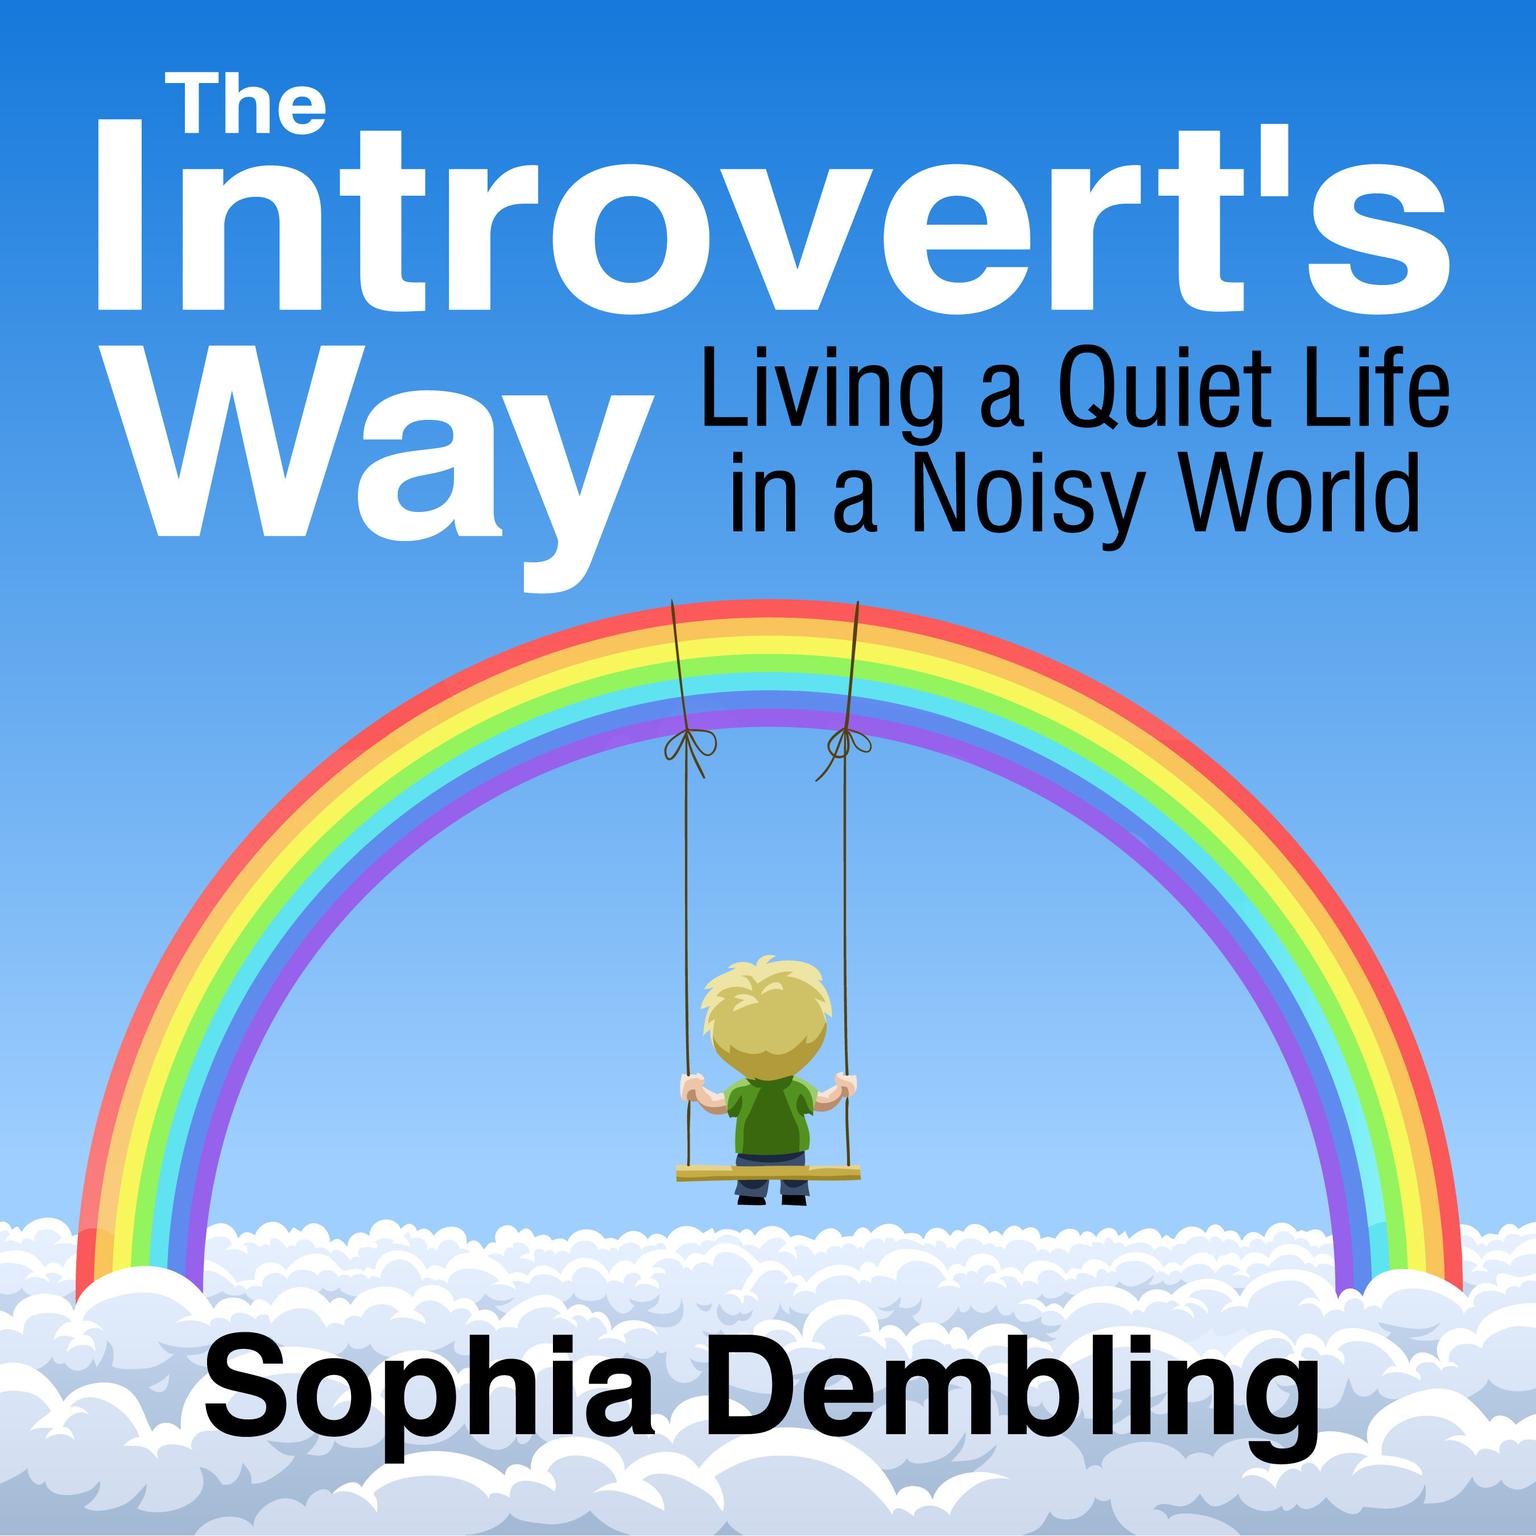 The Introverts Way: Living a Quiet Life in a Noisy World Audiobook, by Sophia Dembling